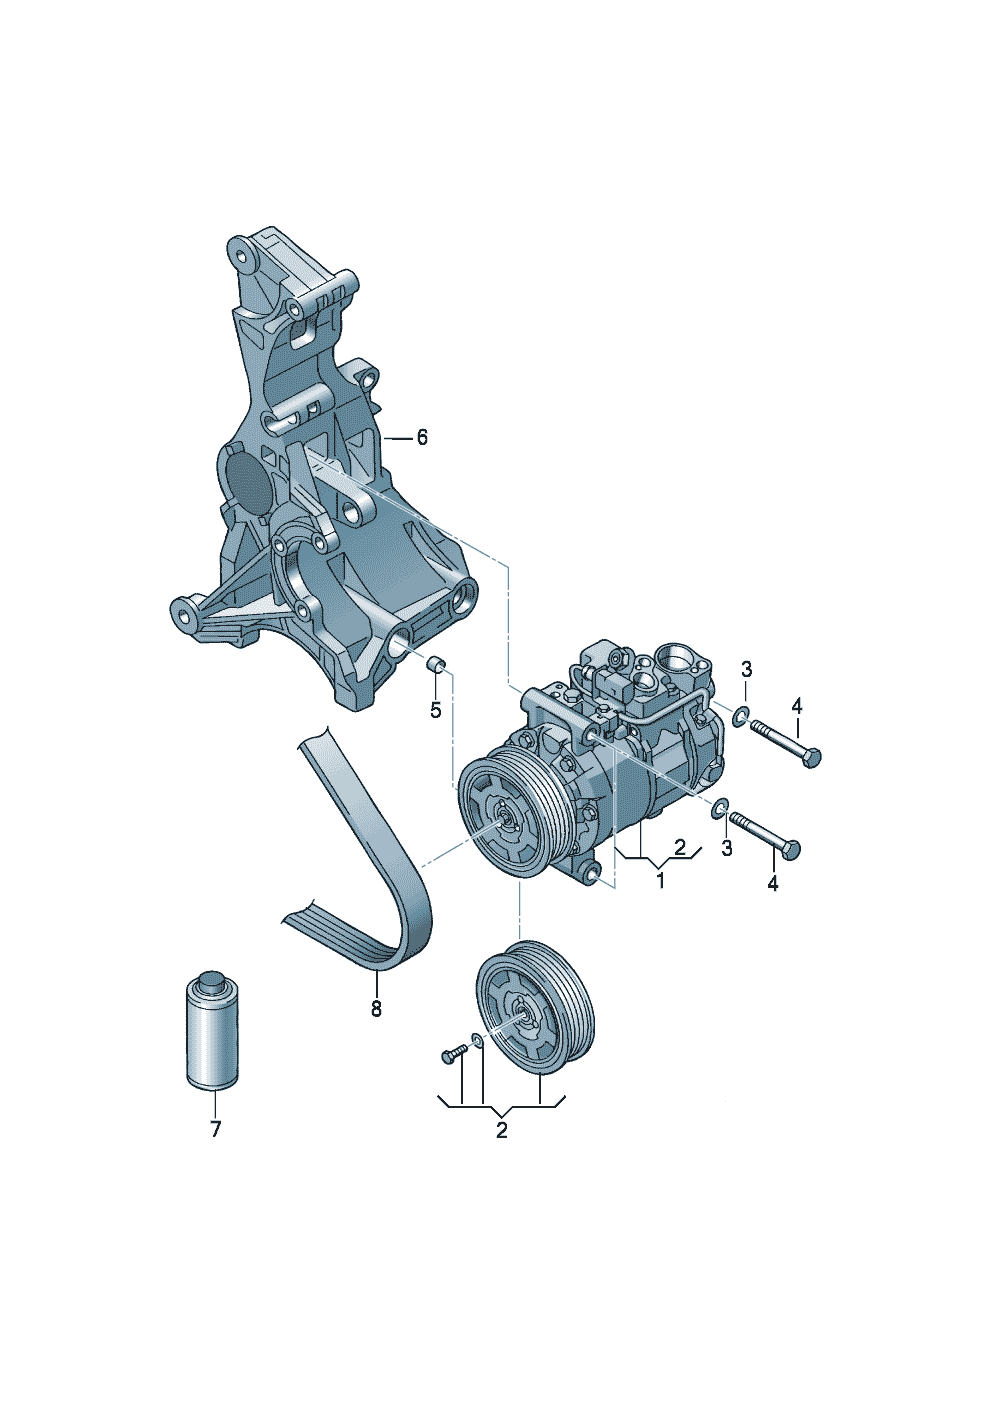 A/C compressorconnecting and mounting parts<br>for compressor 2.0 Ltr. - Audi Q5/Sportback - aq5